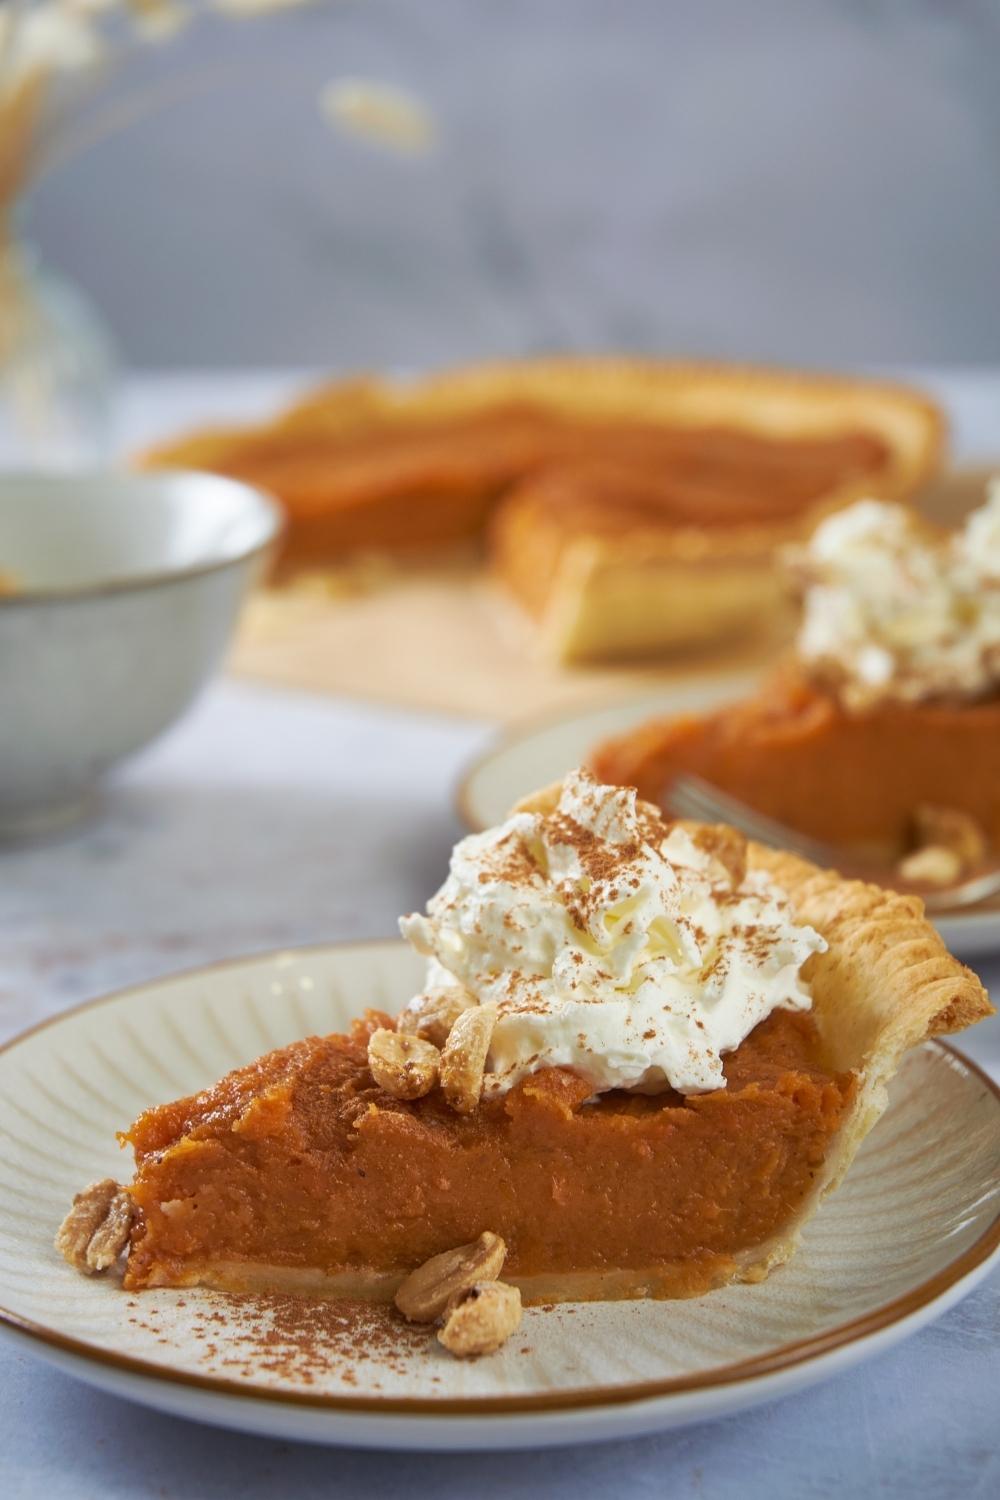 Patti Labelle's sweet potato pie served on a white plate, in the background there is the rest of the pie.